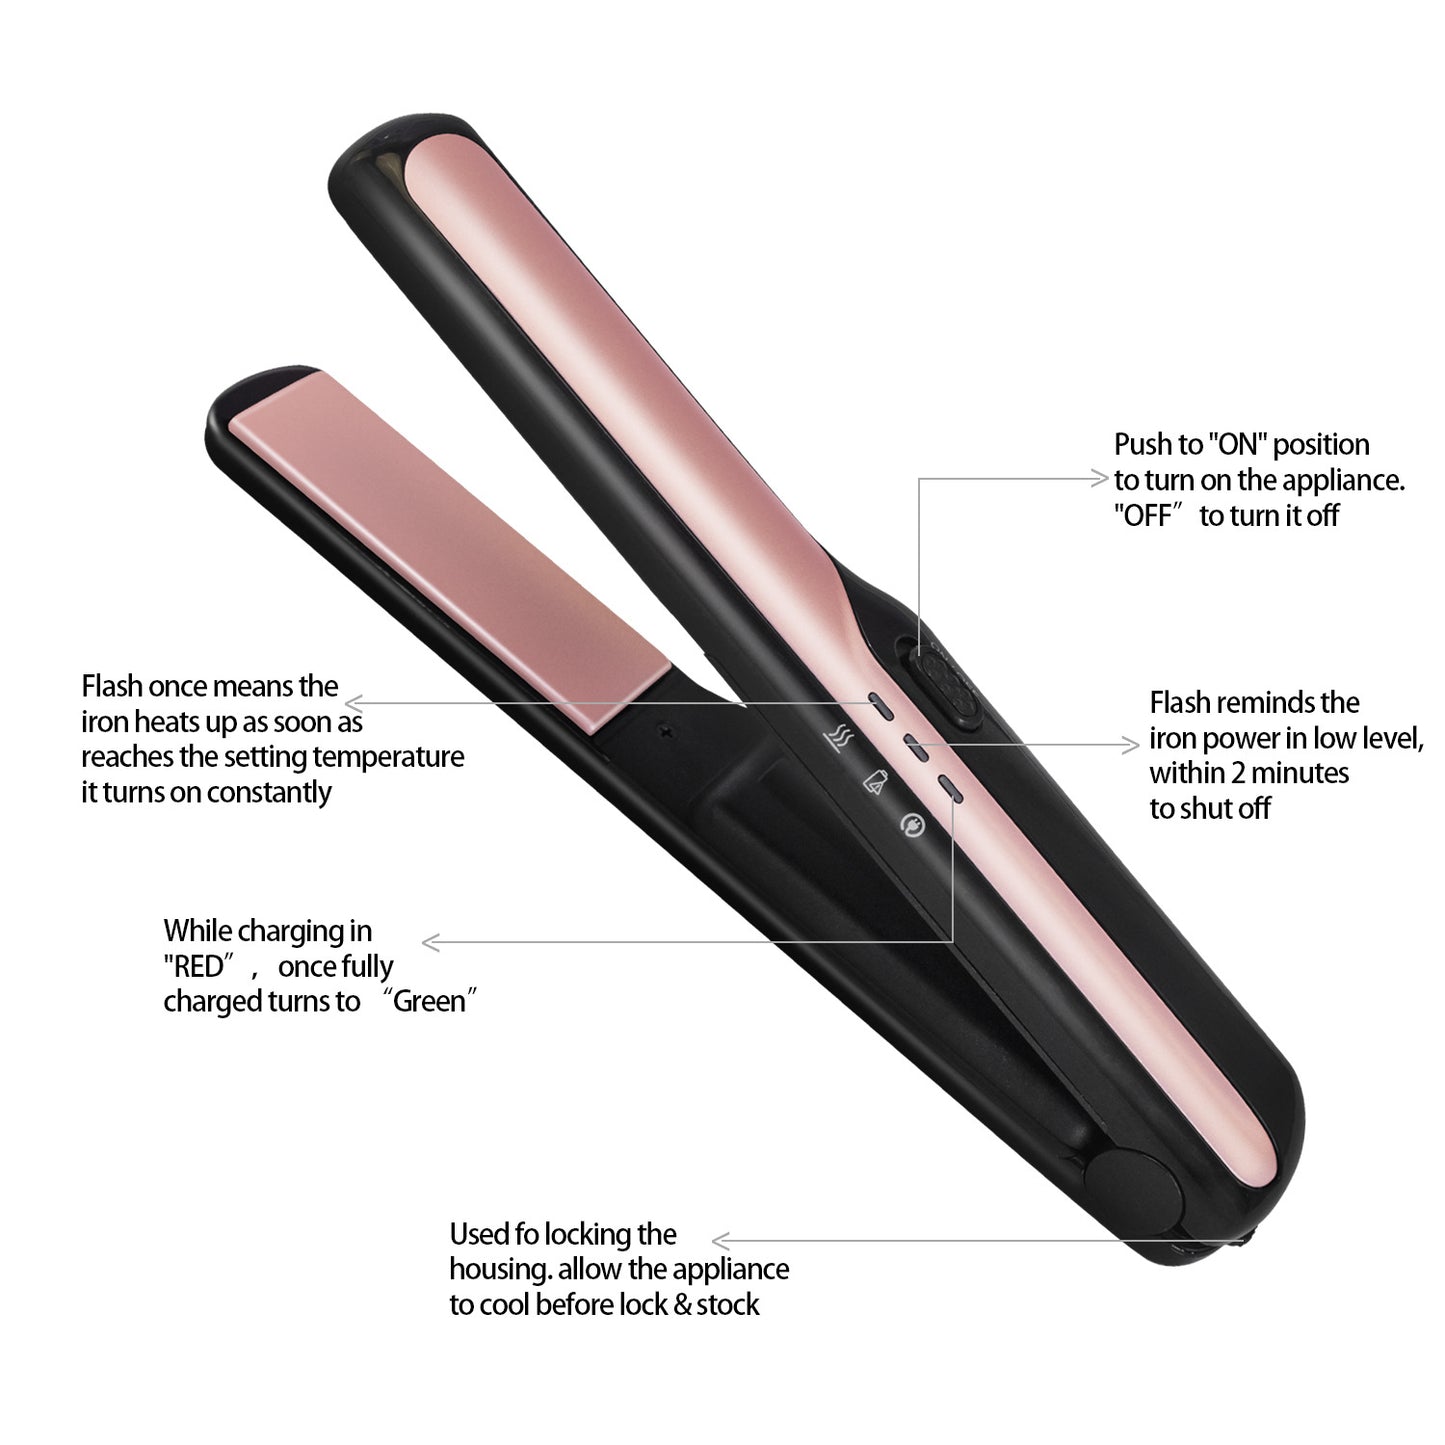 Illuminate Your Style with the Radiant USB Wireless Charging Hair Straightener